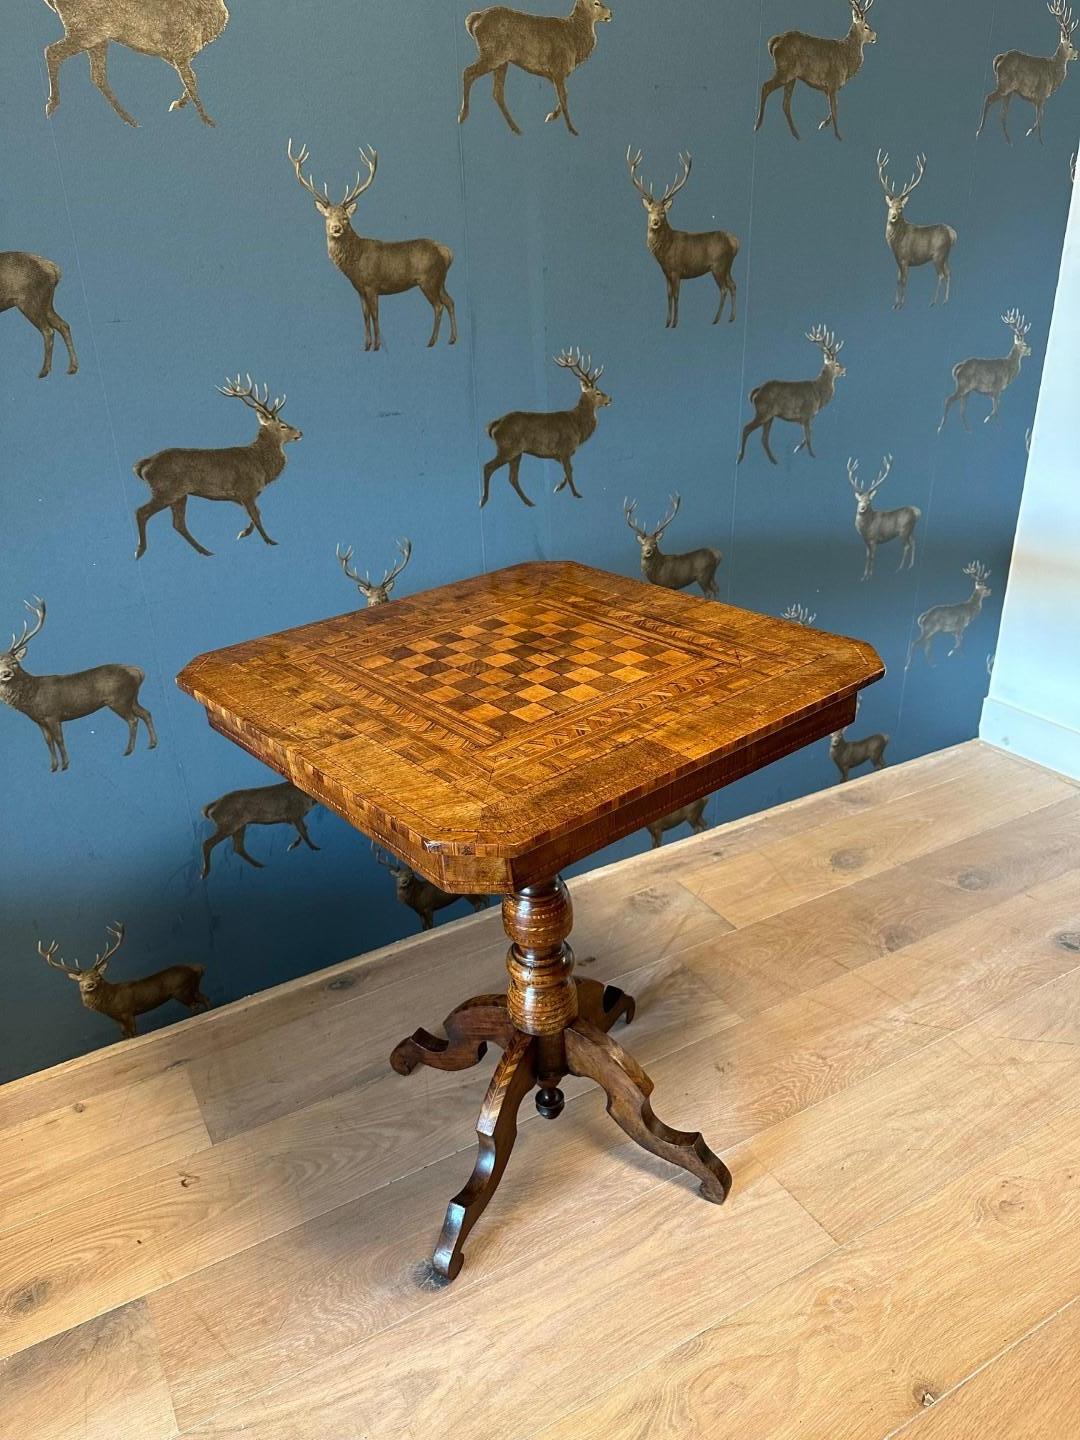 Beautiful antique walnut chess table in good condition. The table has beautiful inlay work, both in the top and the column leg
The table has a  warm color. Nice table to play chess on!

Origin: France
Period: ca. 1820
Size 60cm x 60cm x h.72cm